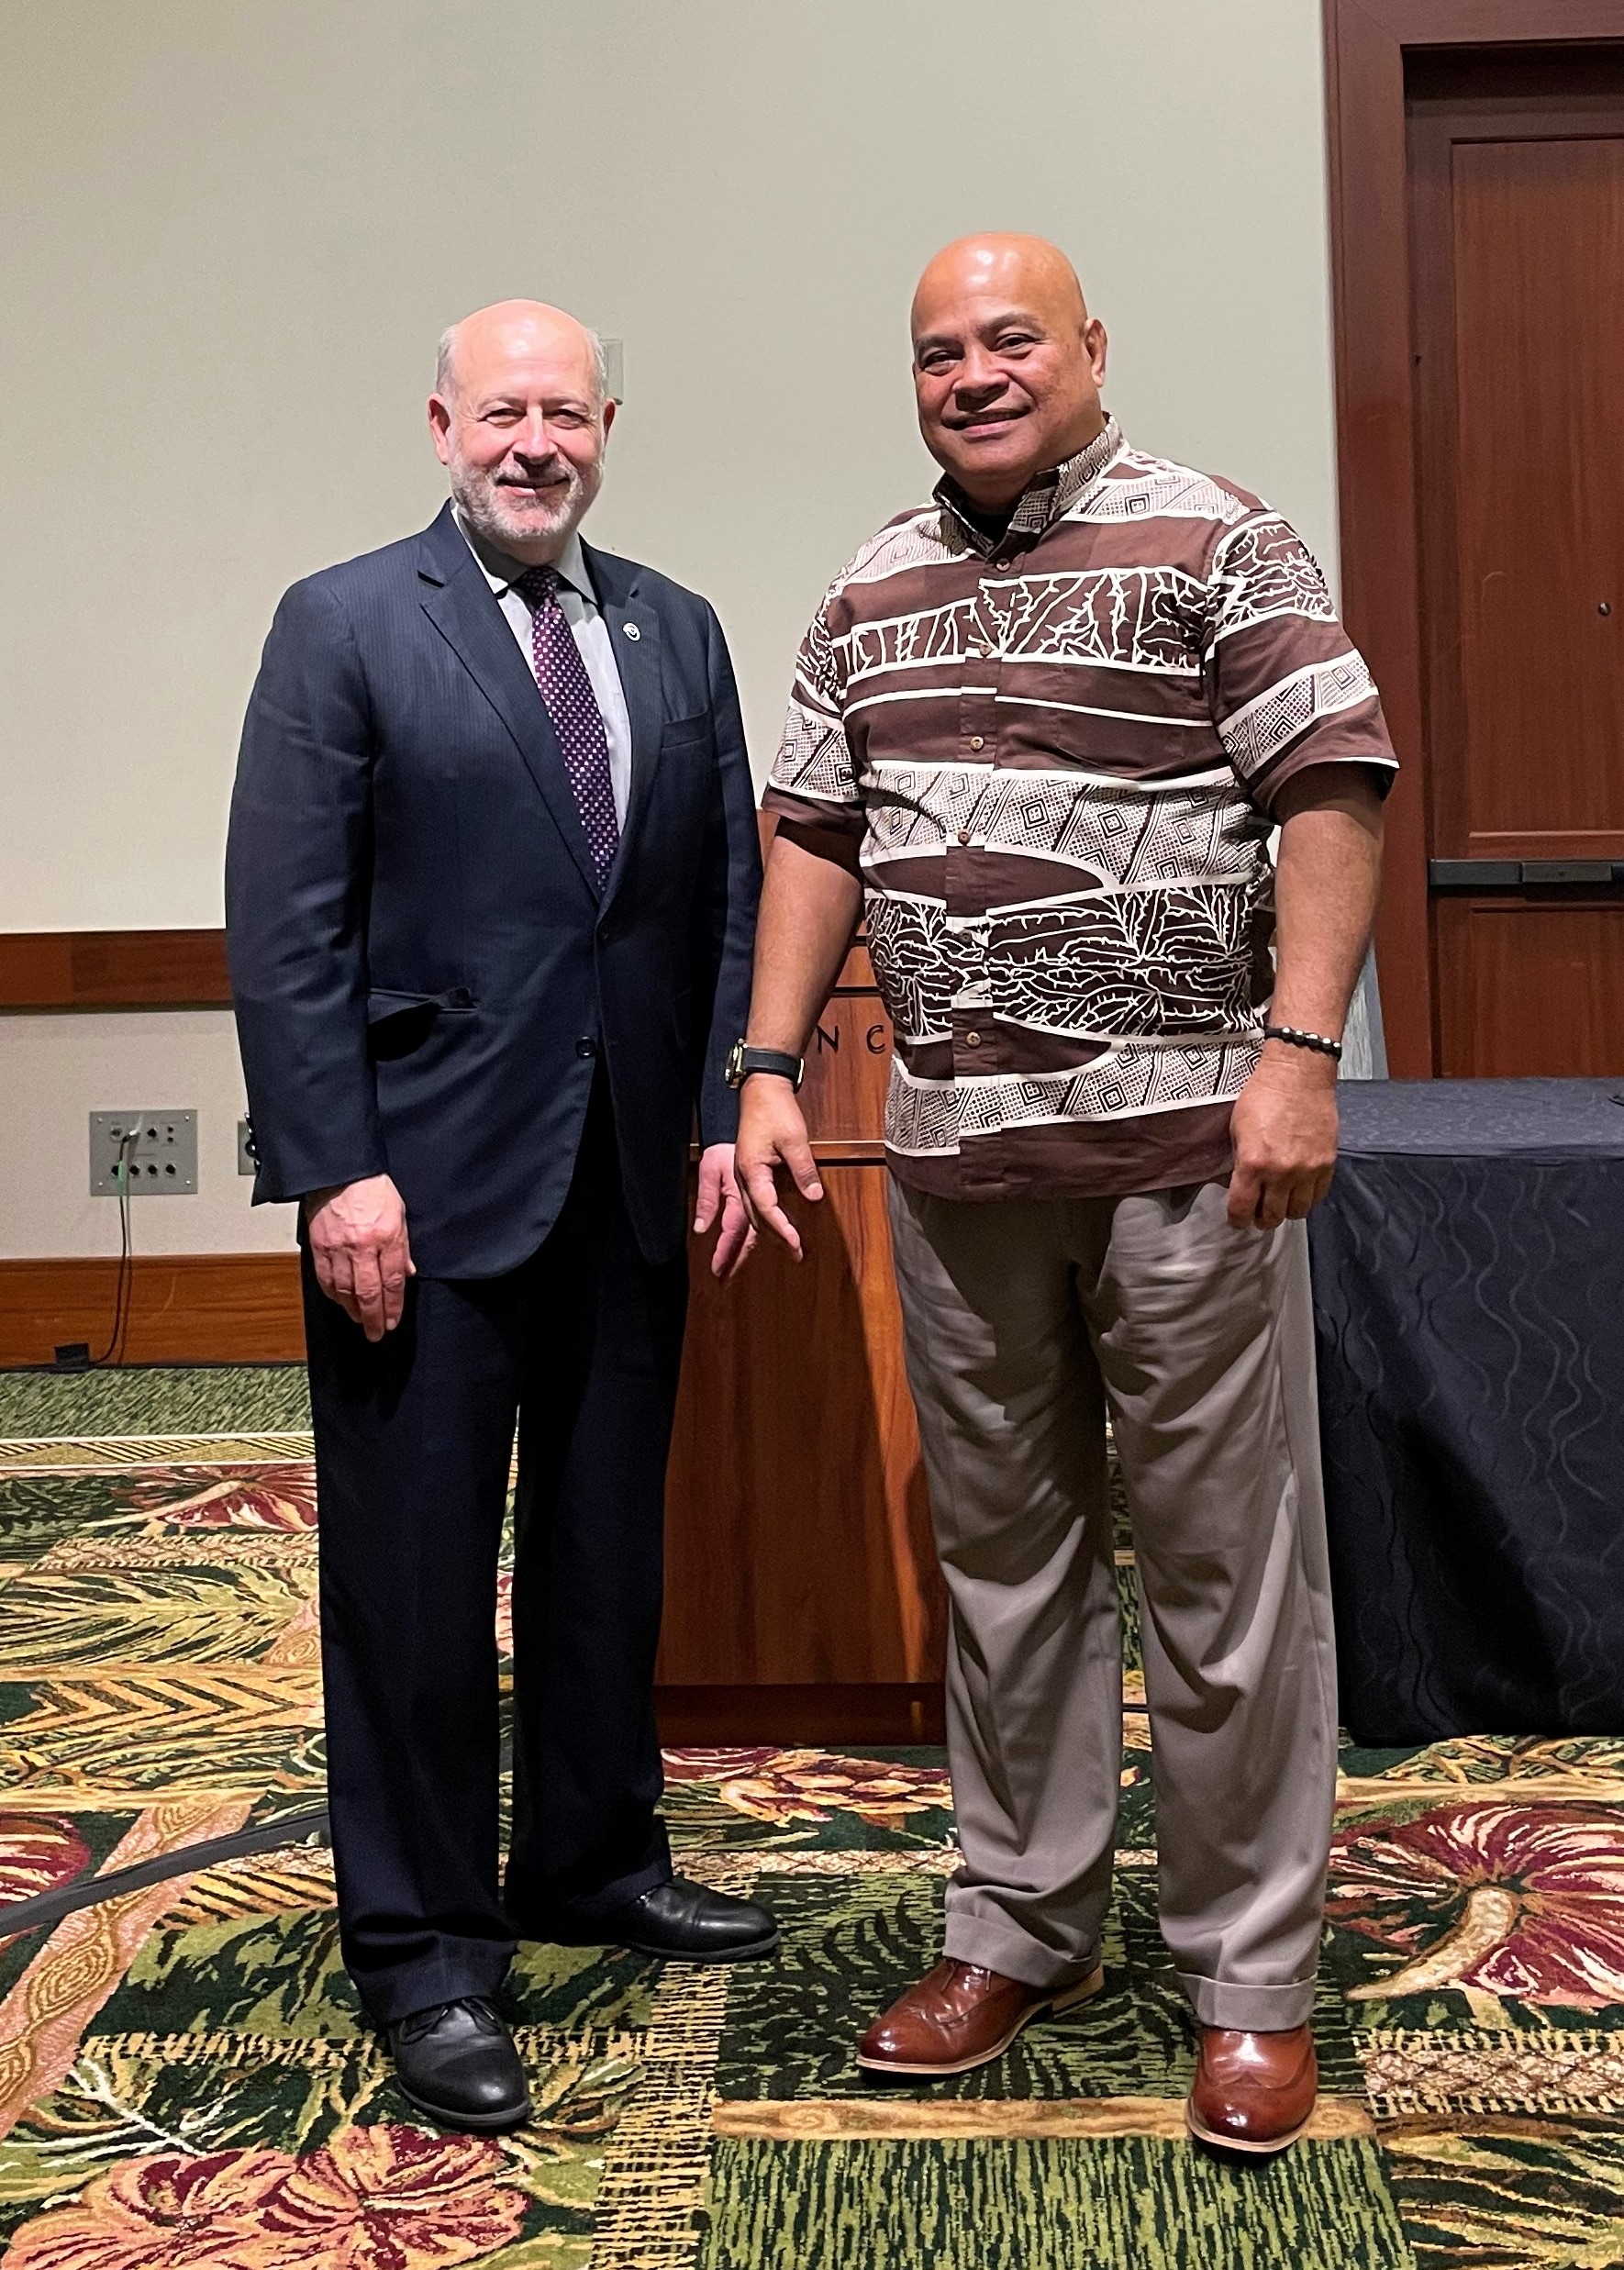 Dr. Spinrad Meets with President David Panuelo, Federated States of Micronesia